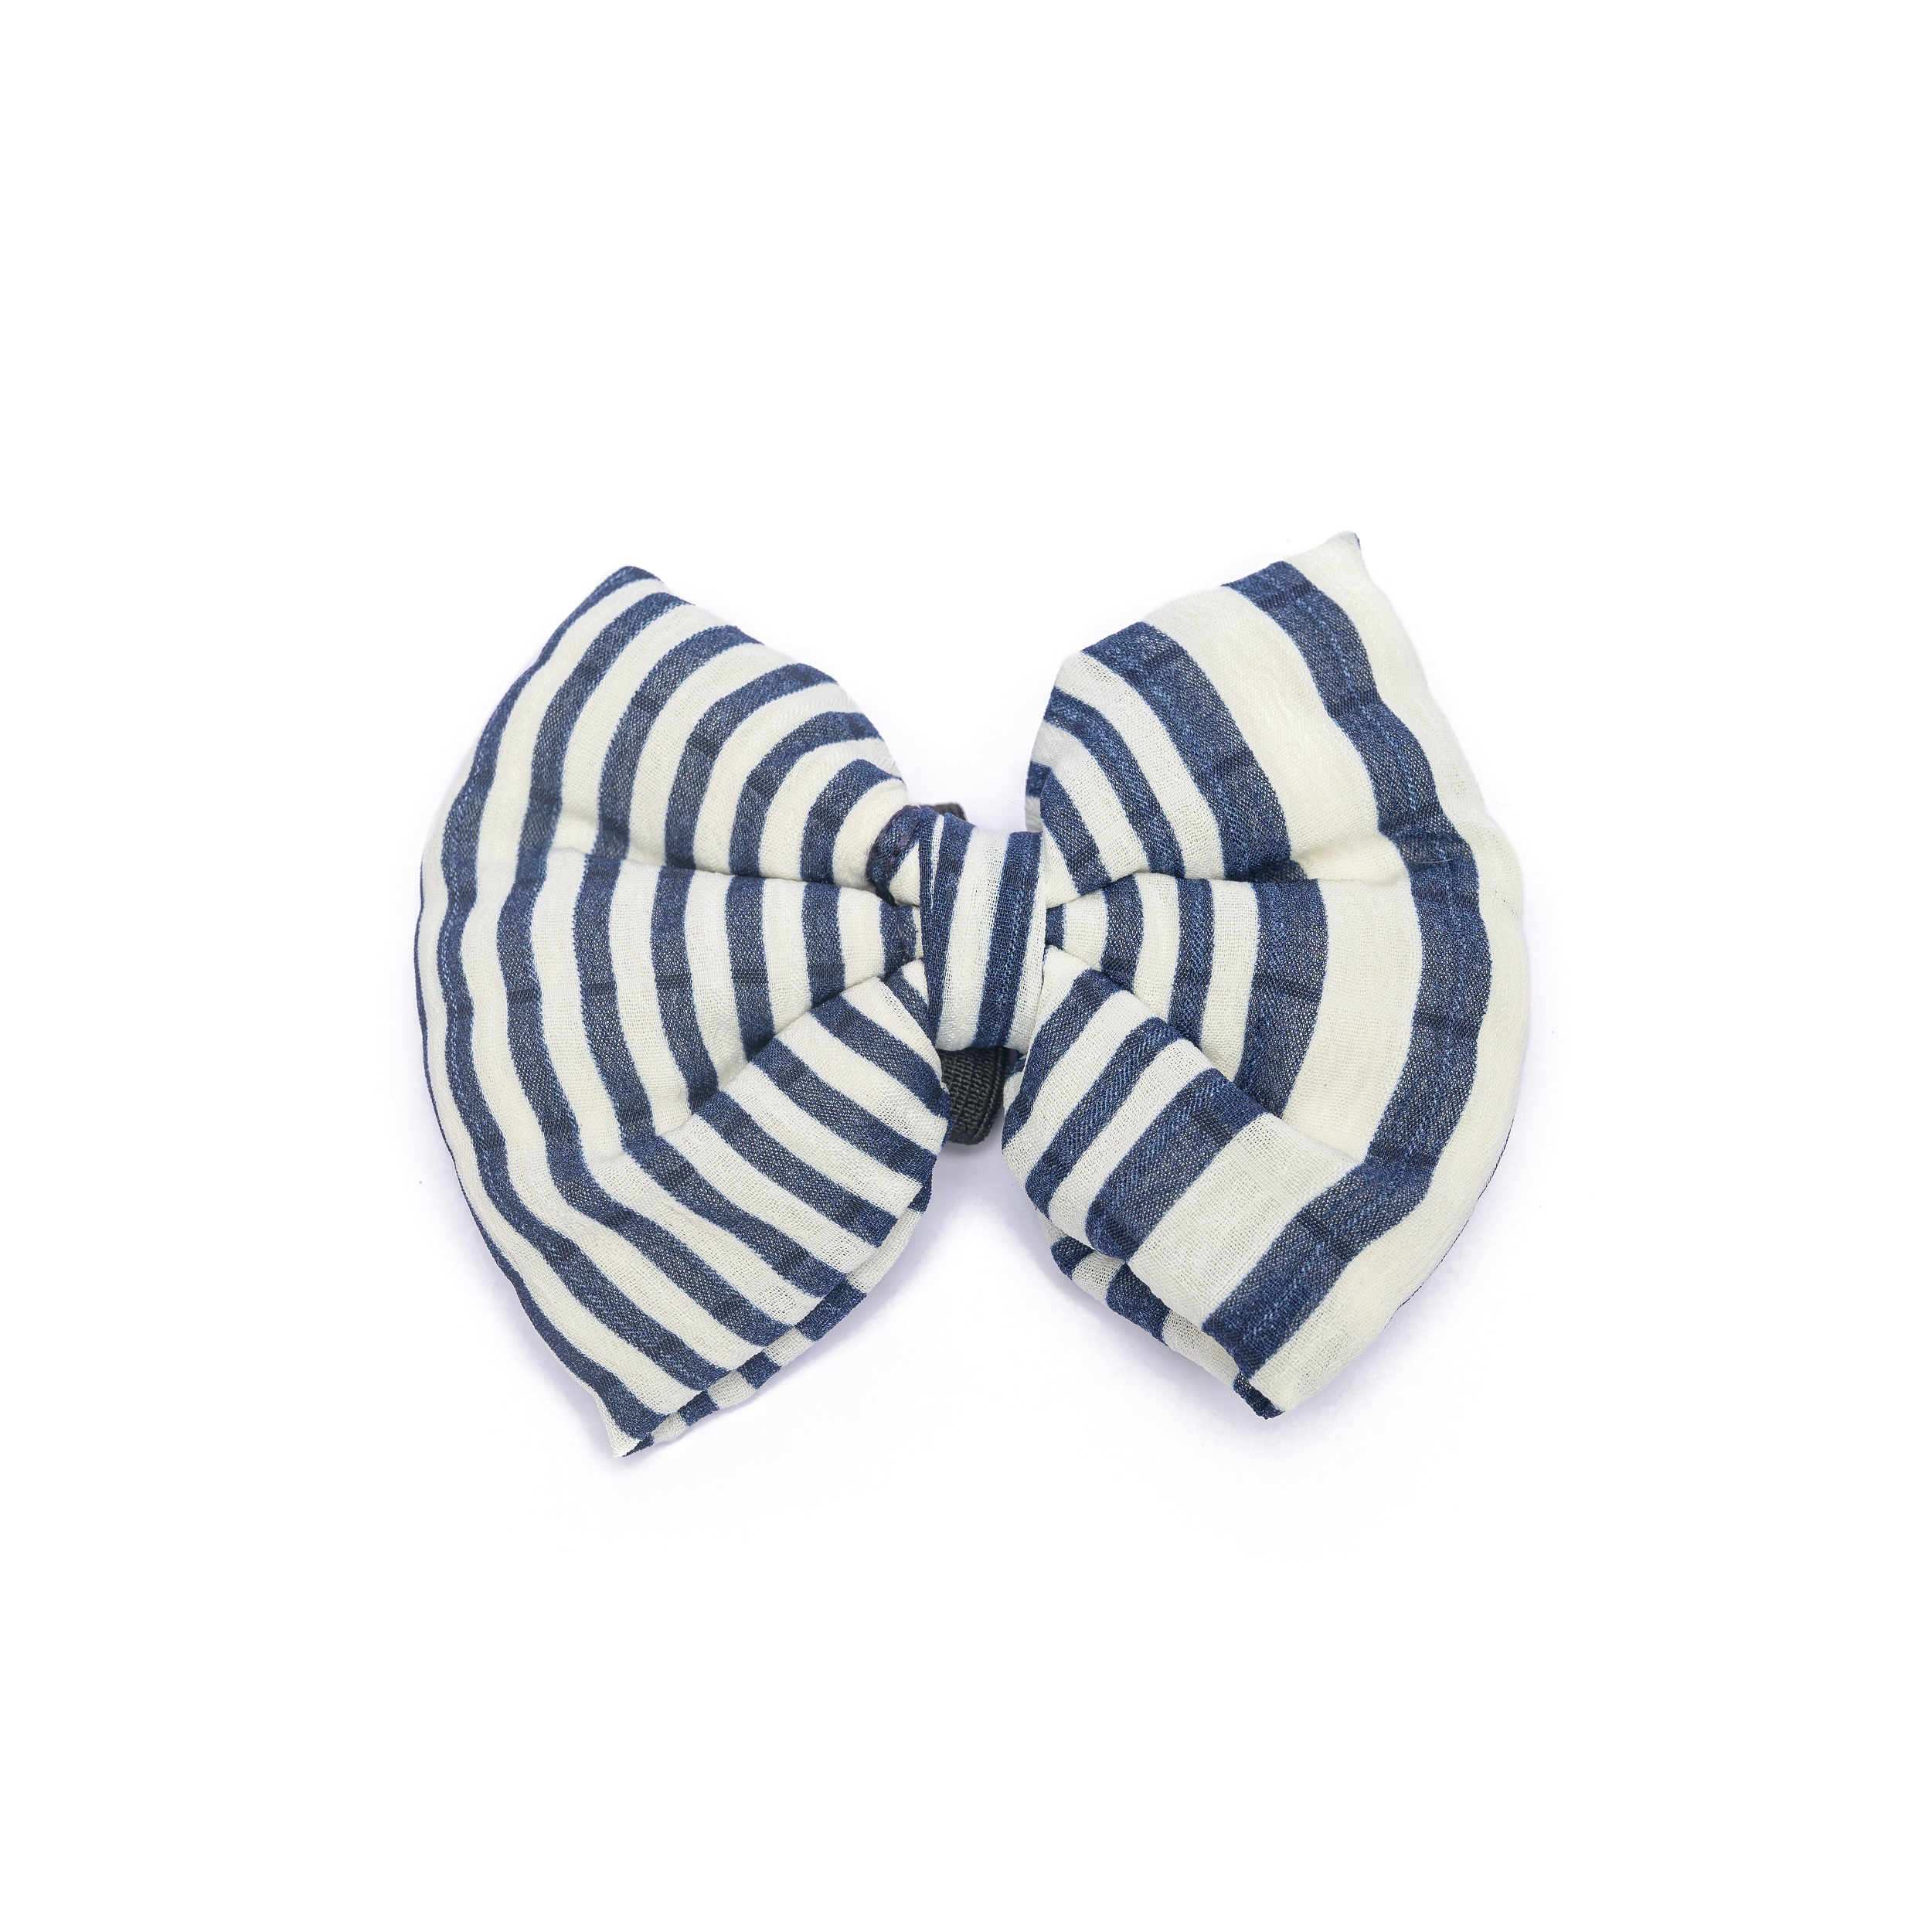 PetWale Bow-tie for Dogs - Blue Stripes